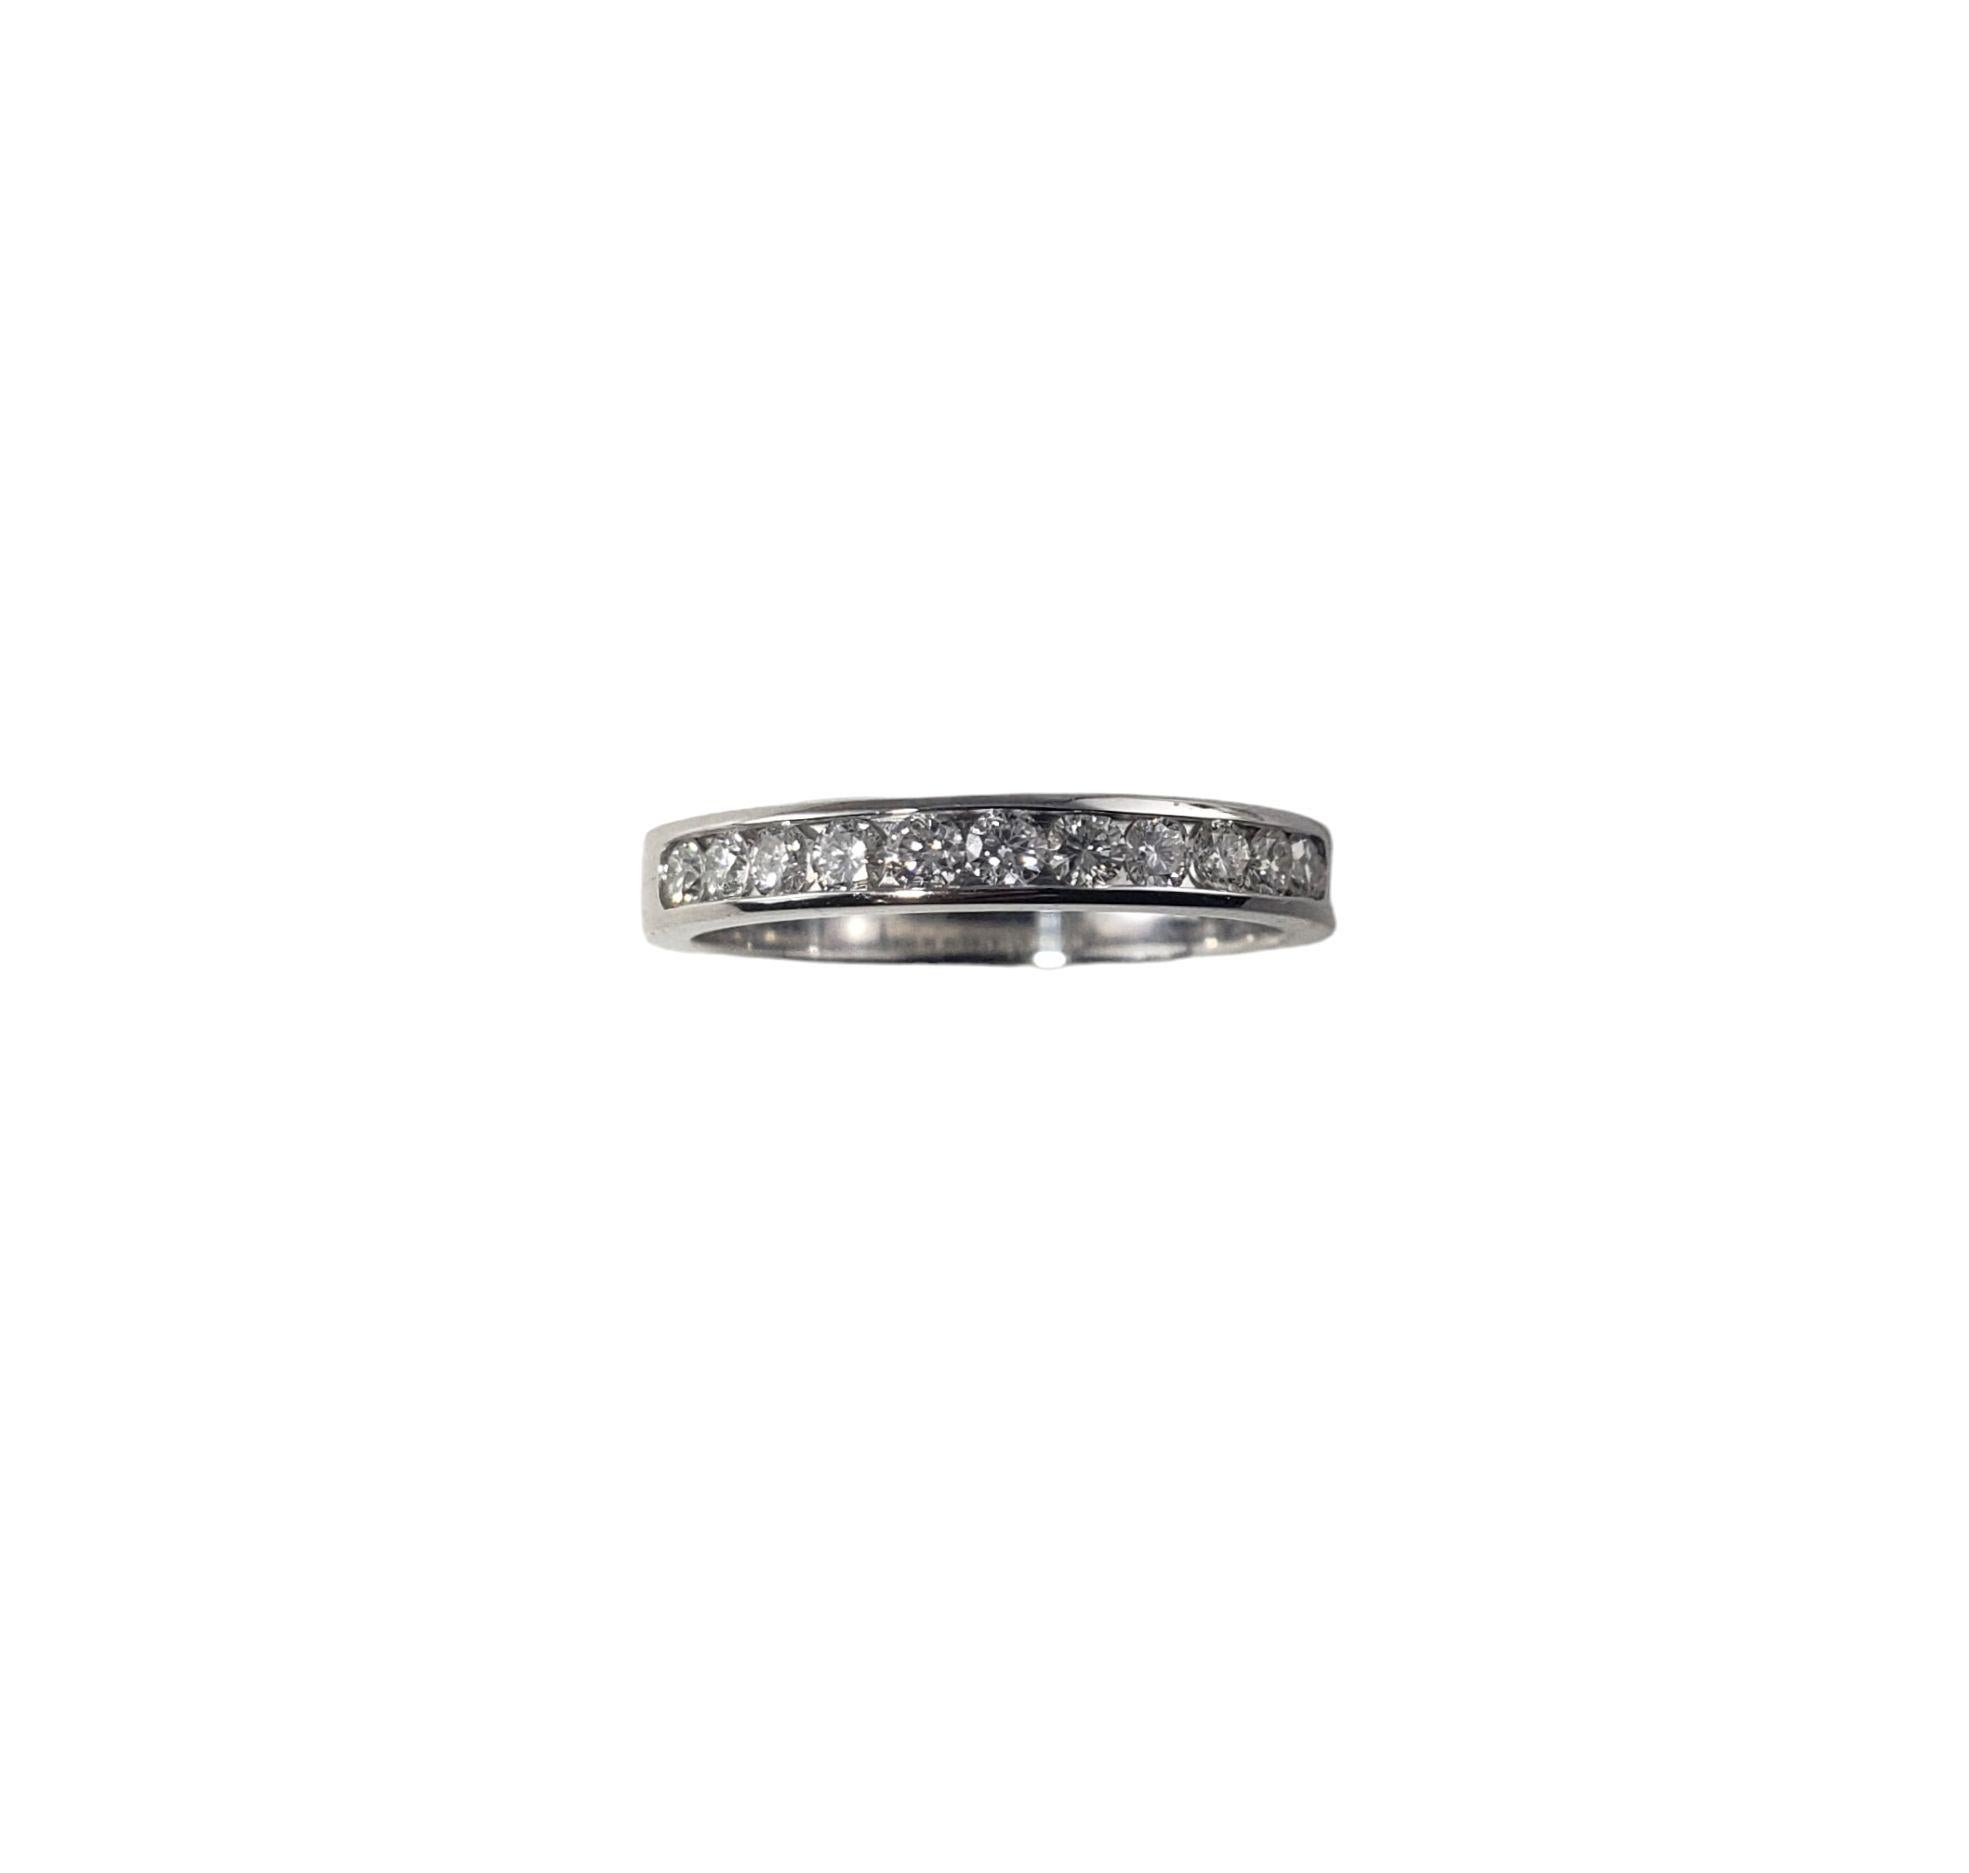 This sparkling band features 11 round brilliant cut diamonds set in classic 14K white gold.  Width: 3 mm.

Approximate total diamond weight: .44 ct.

Diamond color: G

Diamond clarity: VS2

Ring Size: 6

Weight: 1.6 dwt. / 2.5 gr.

Stamped: